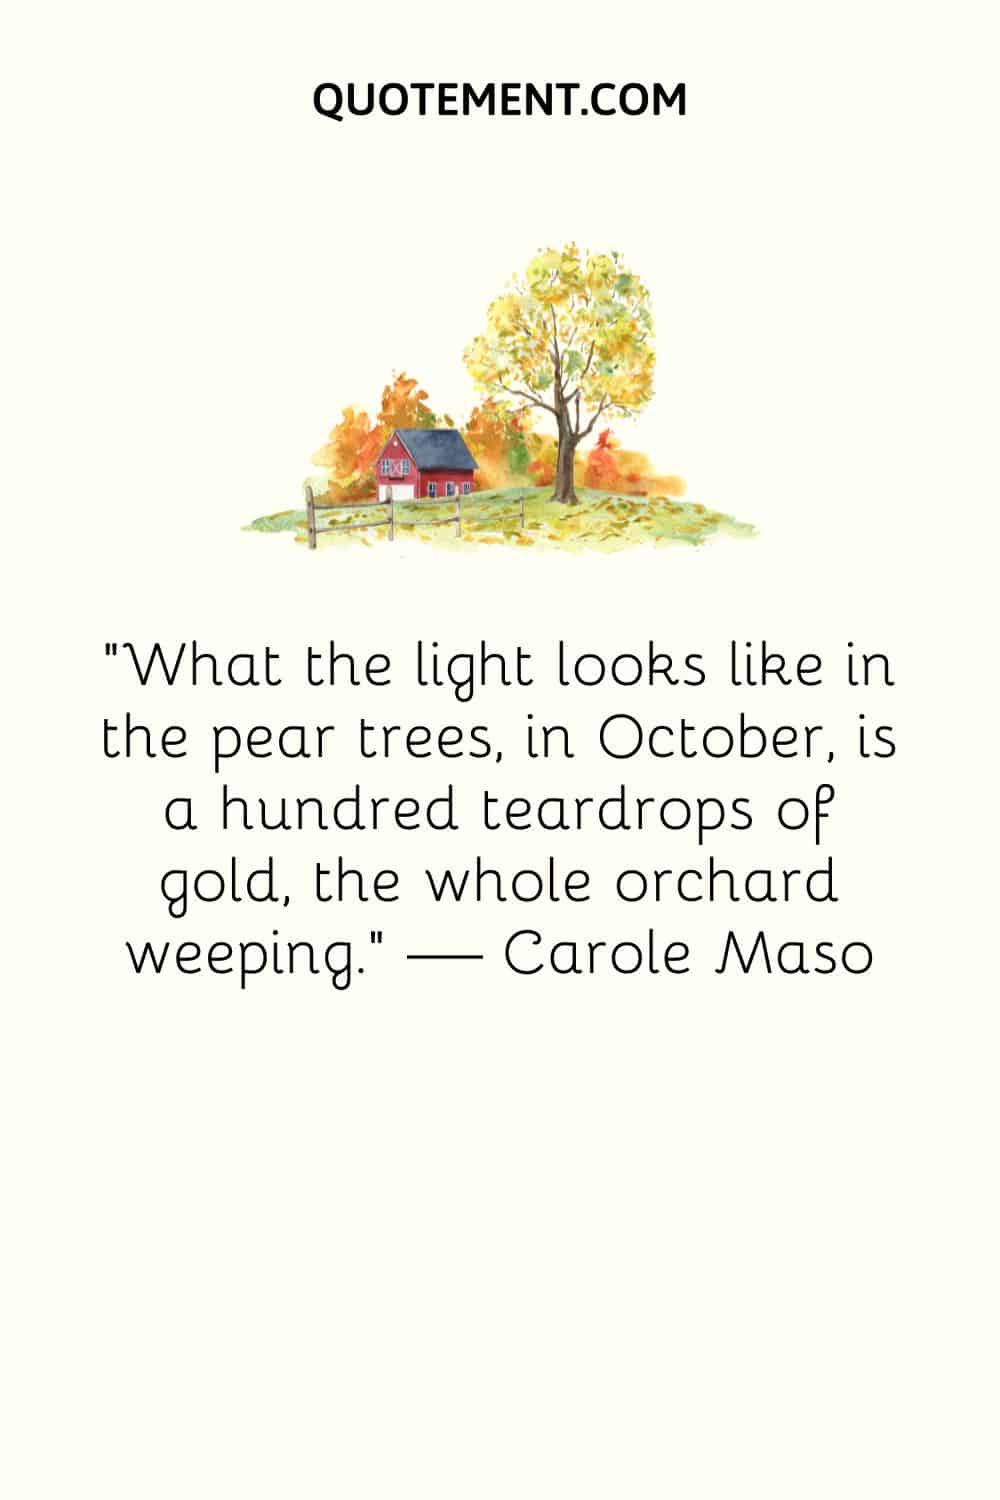 What the light looks like in the pear trees, in October, is a hundred teardrops of gold, the whole orchard weeping